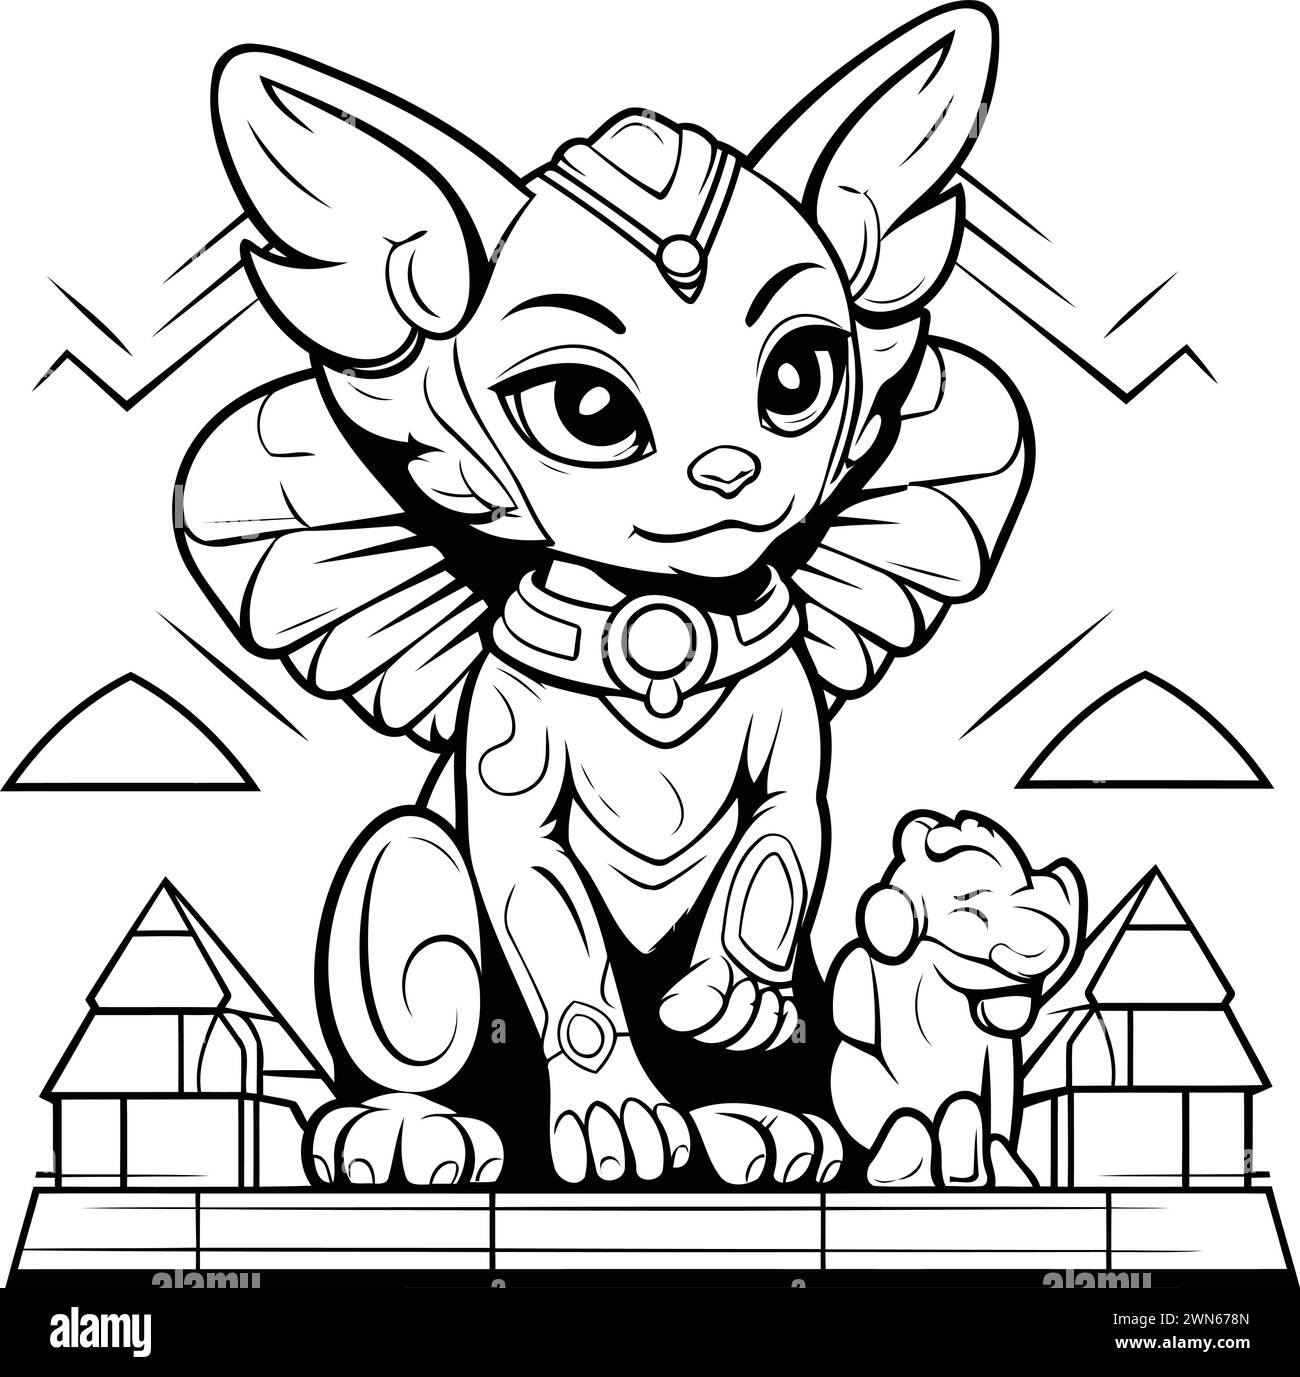 Black and White Cartoon Illustration of Cute Sphinx Fantasy Animal Character for Coloring Book Stock Vector